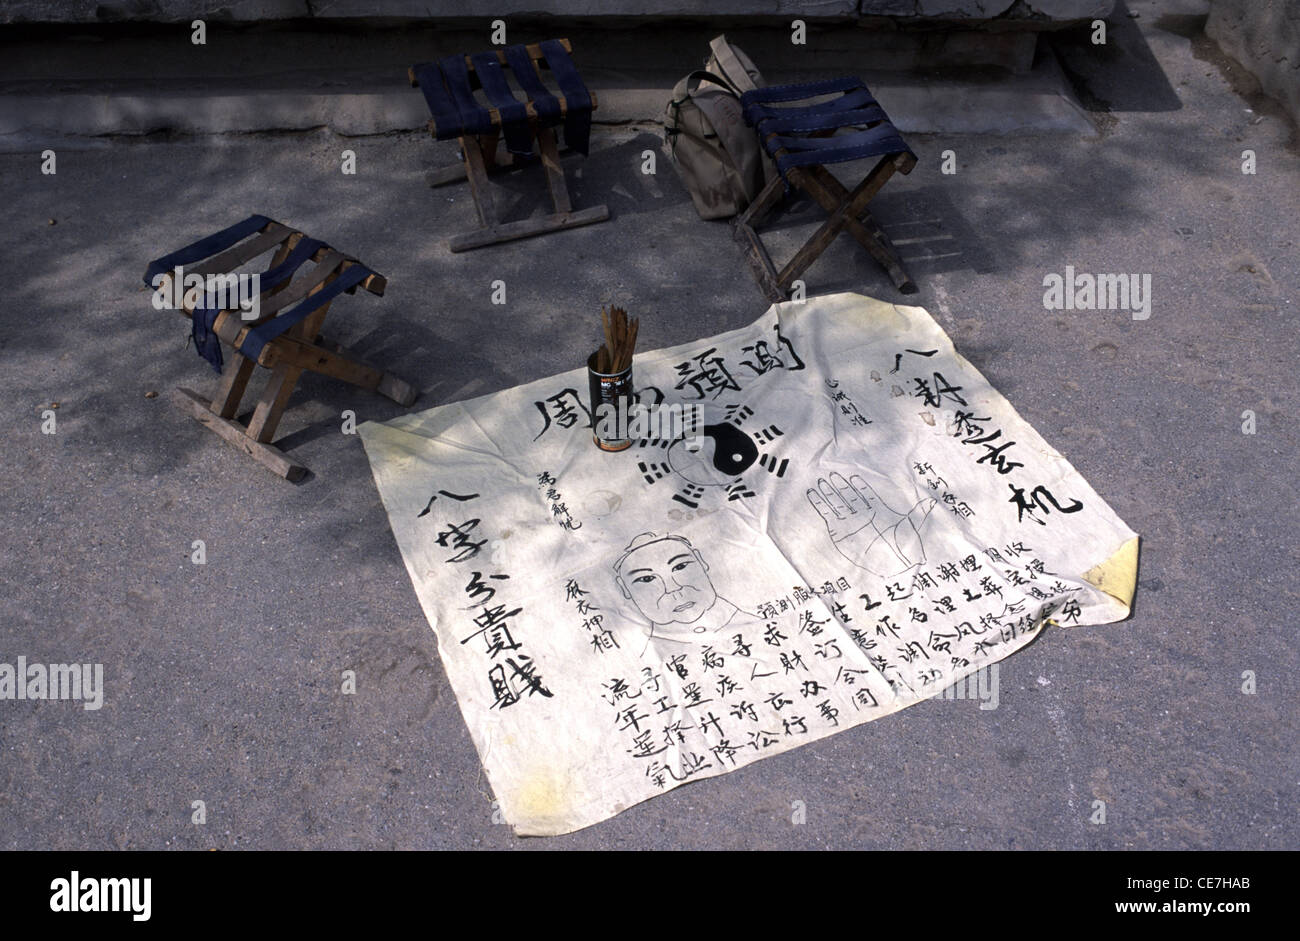 Fortune teller stall known as Suan ming with the Bagua diagram in China Stock Photo